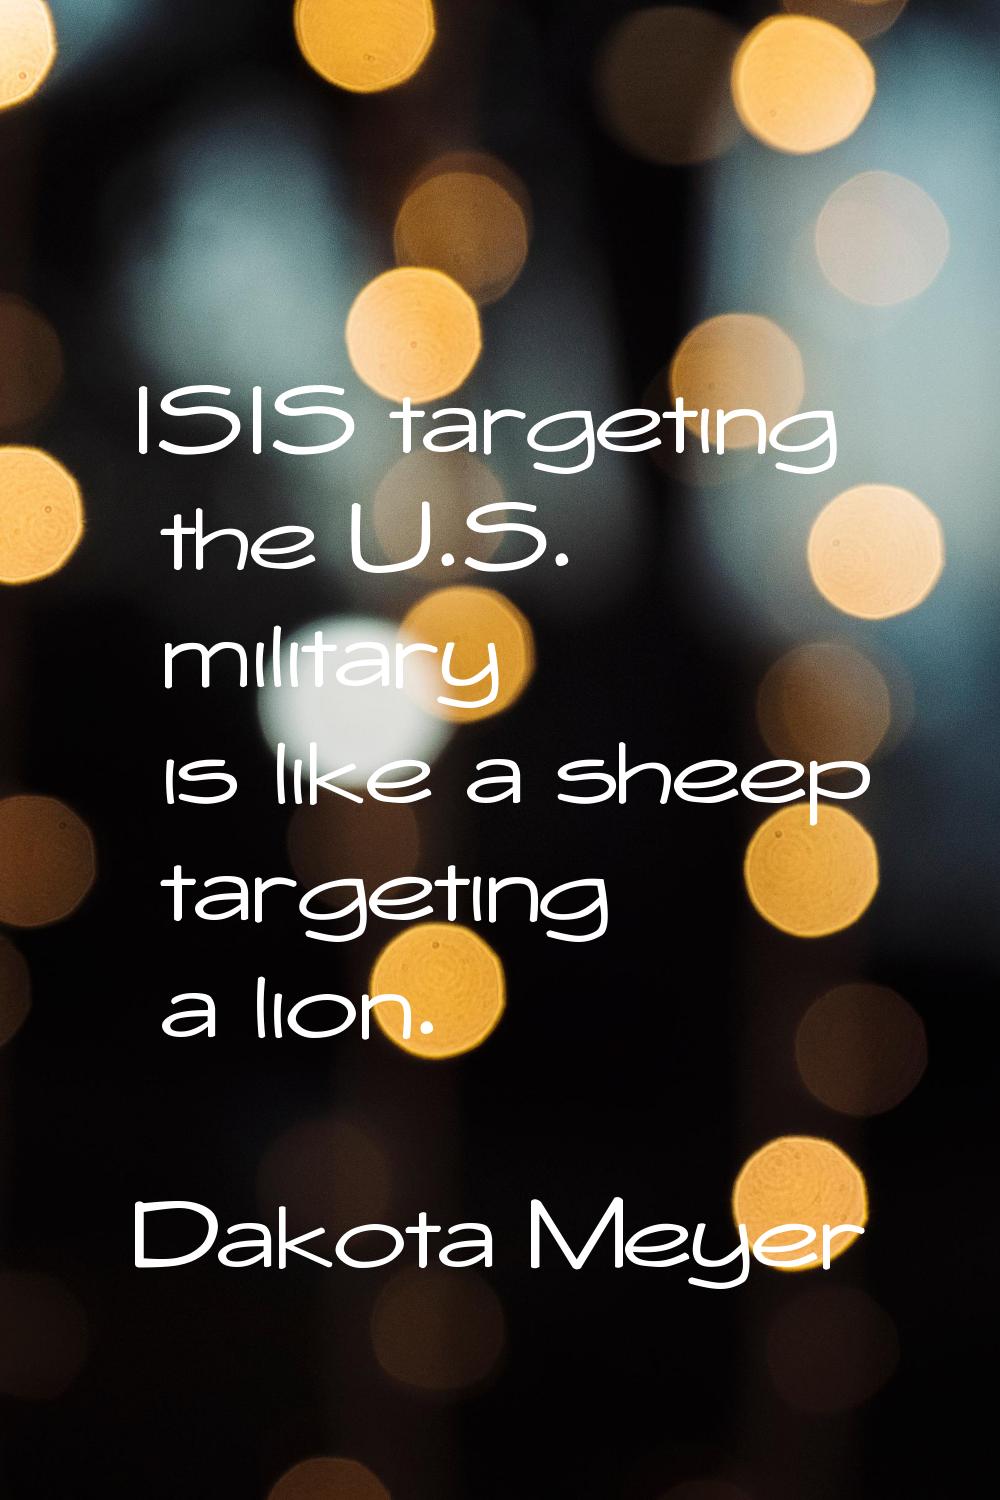 ISIS targeting the U.S. military is like a sheep targeting a lion.